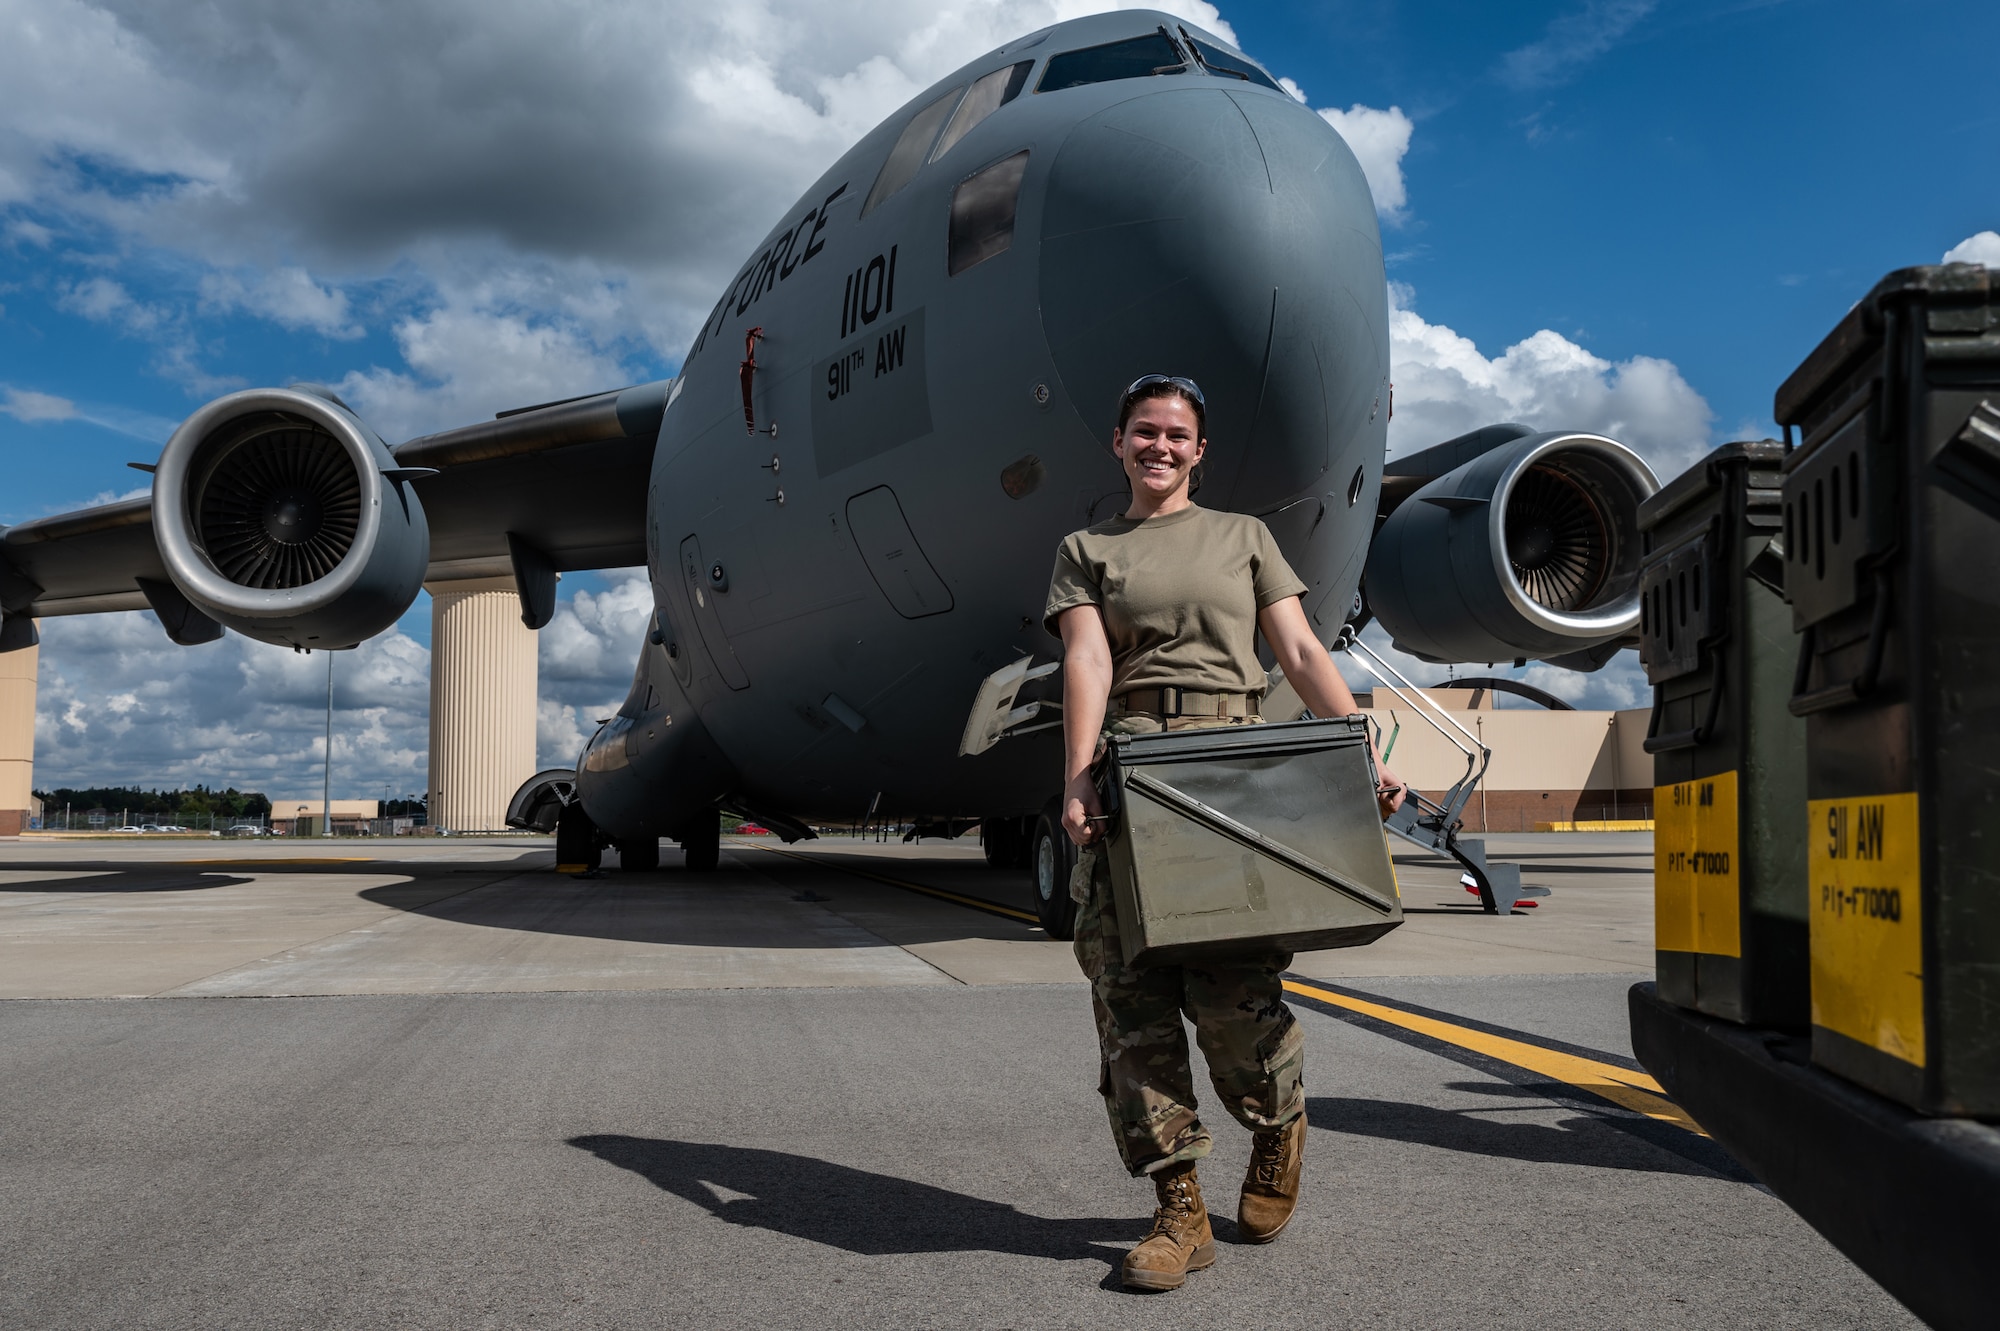 Airman holding a green box smiles while walking in front of a C-17